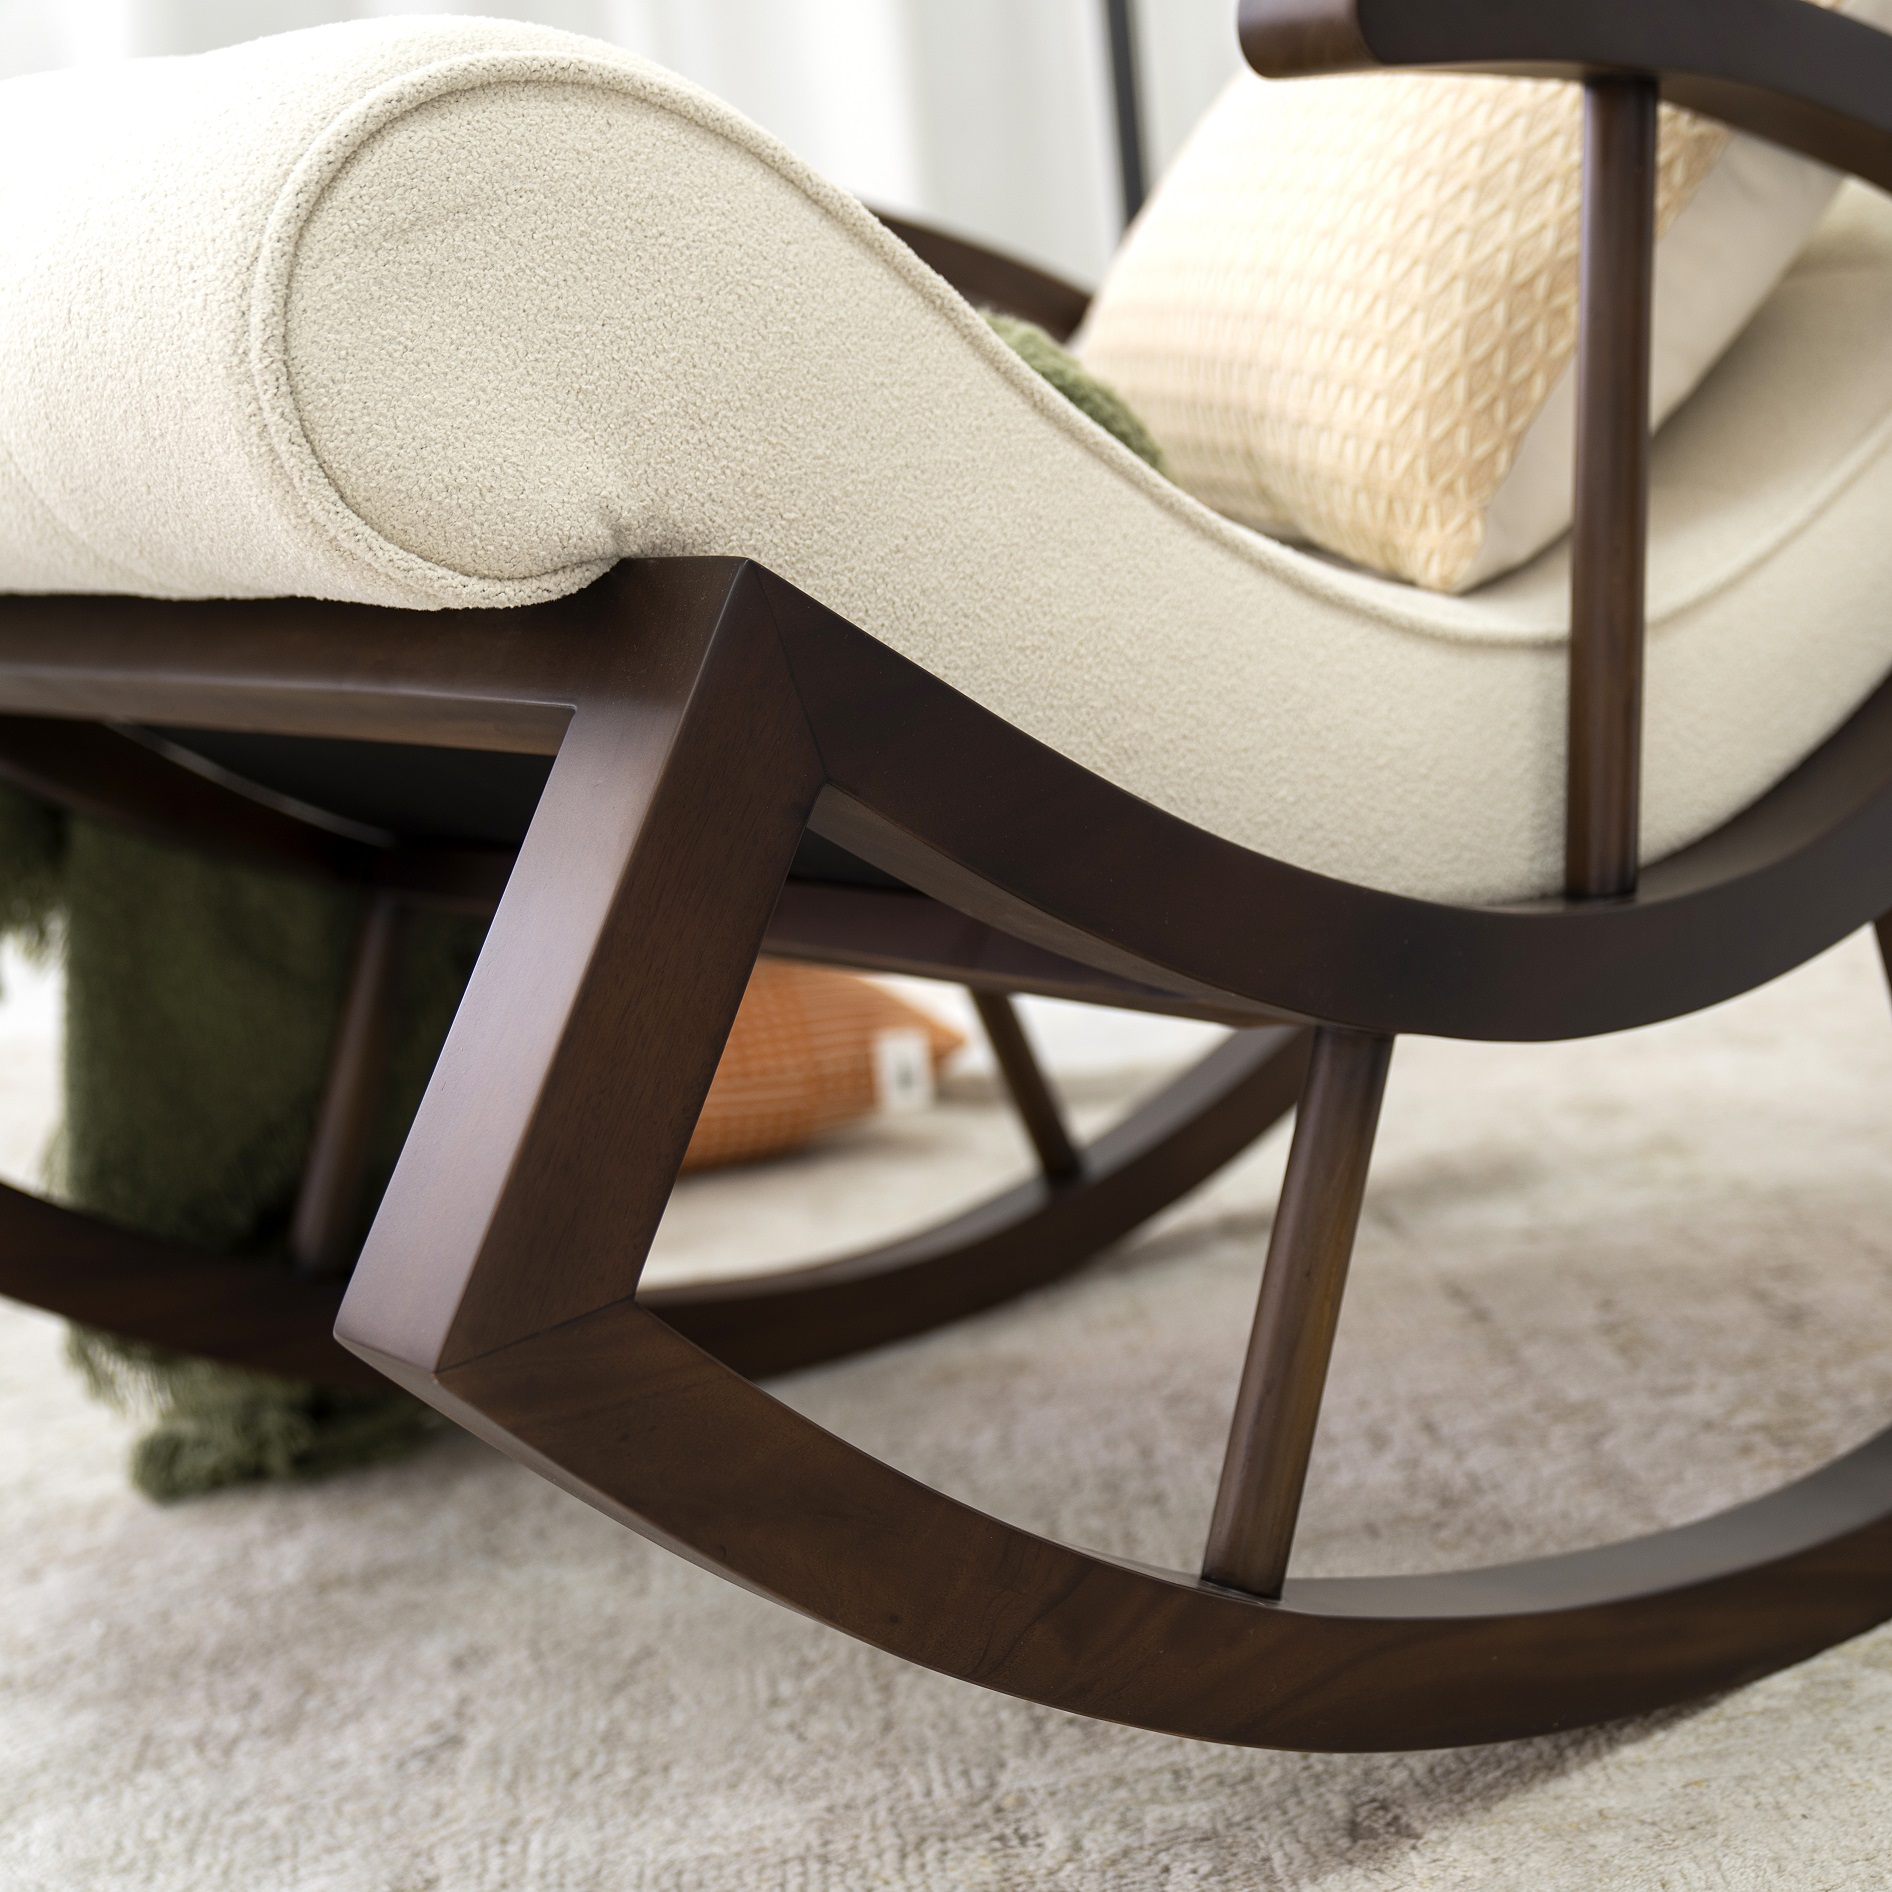 THE LAZE ROCKING CHAIR (10)